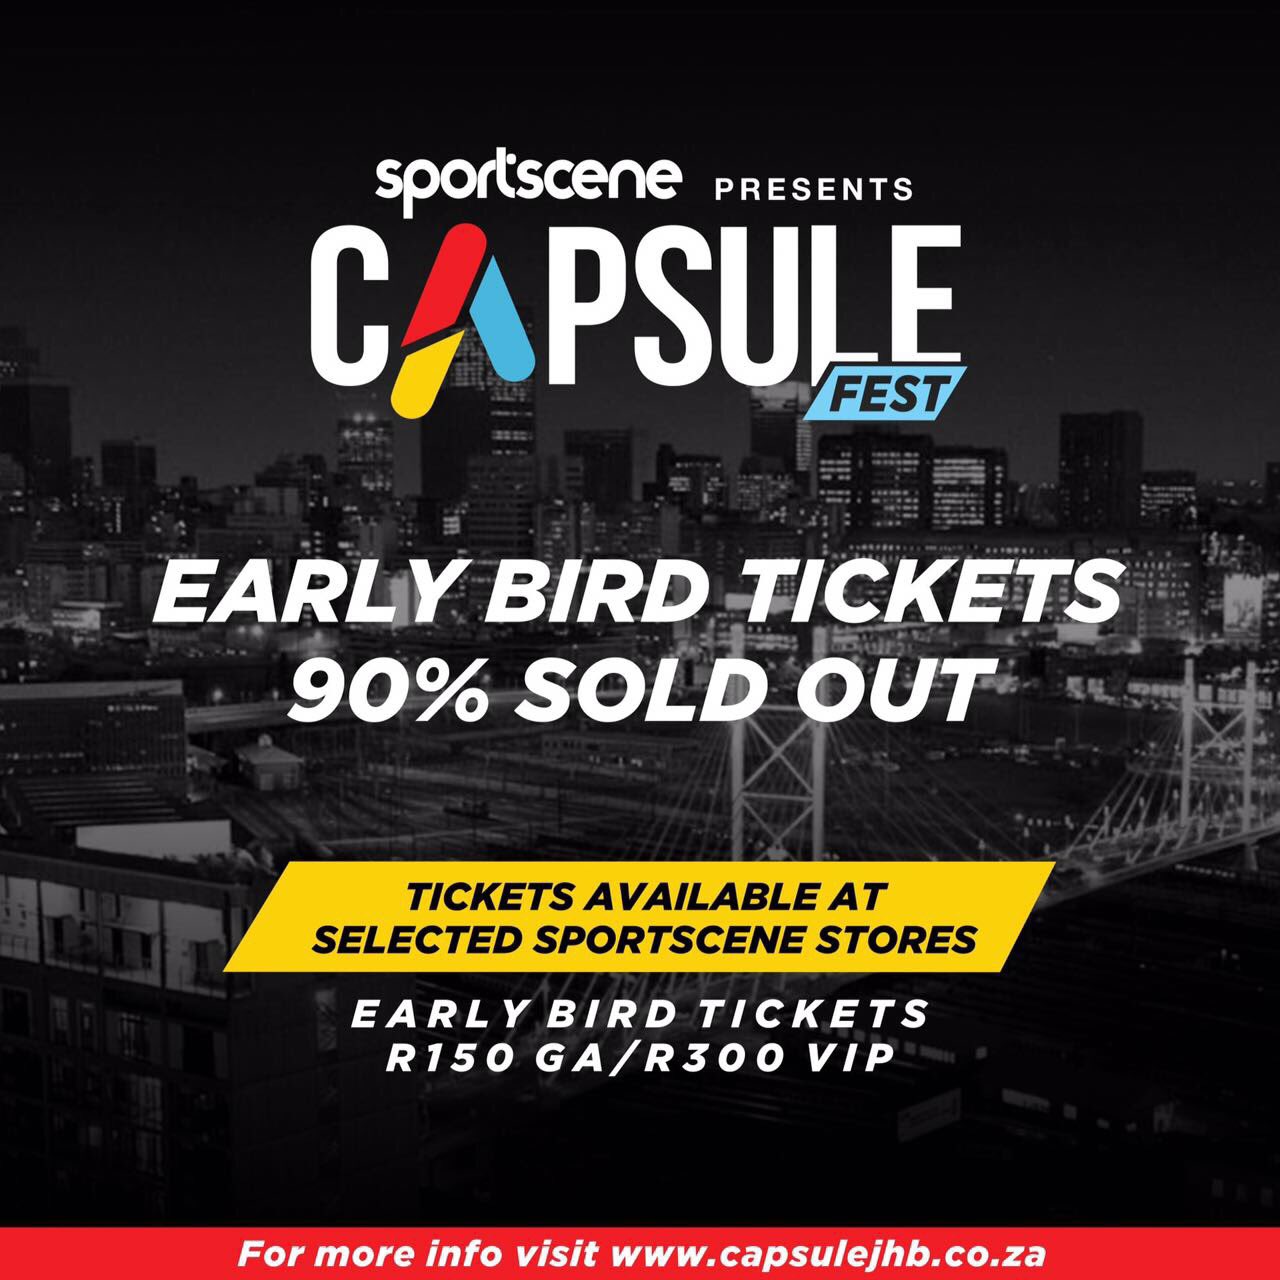 sportscene on Twitter: "Early Bird tickets are on the verge of selling out! Best you cop yours A$AP. 😉 #CapsuleSA https://t.co/HEotNh6Cl9" / Twitter